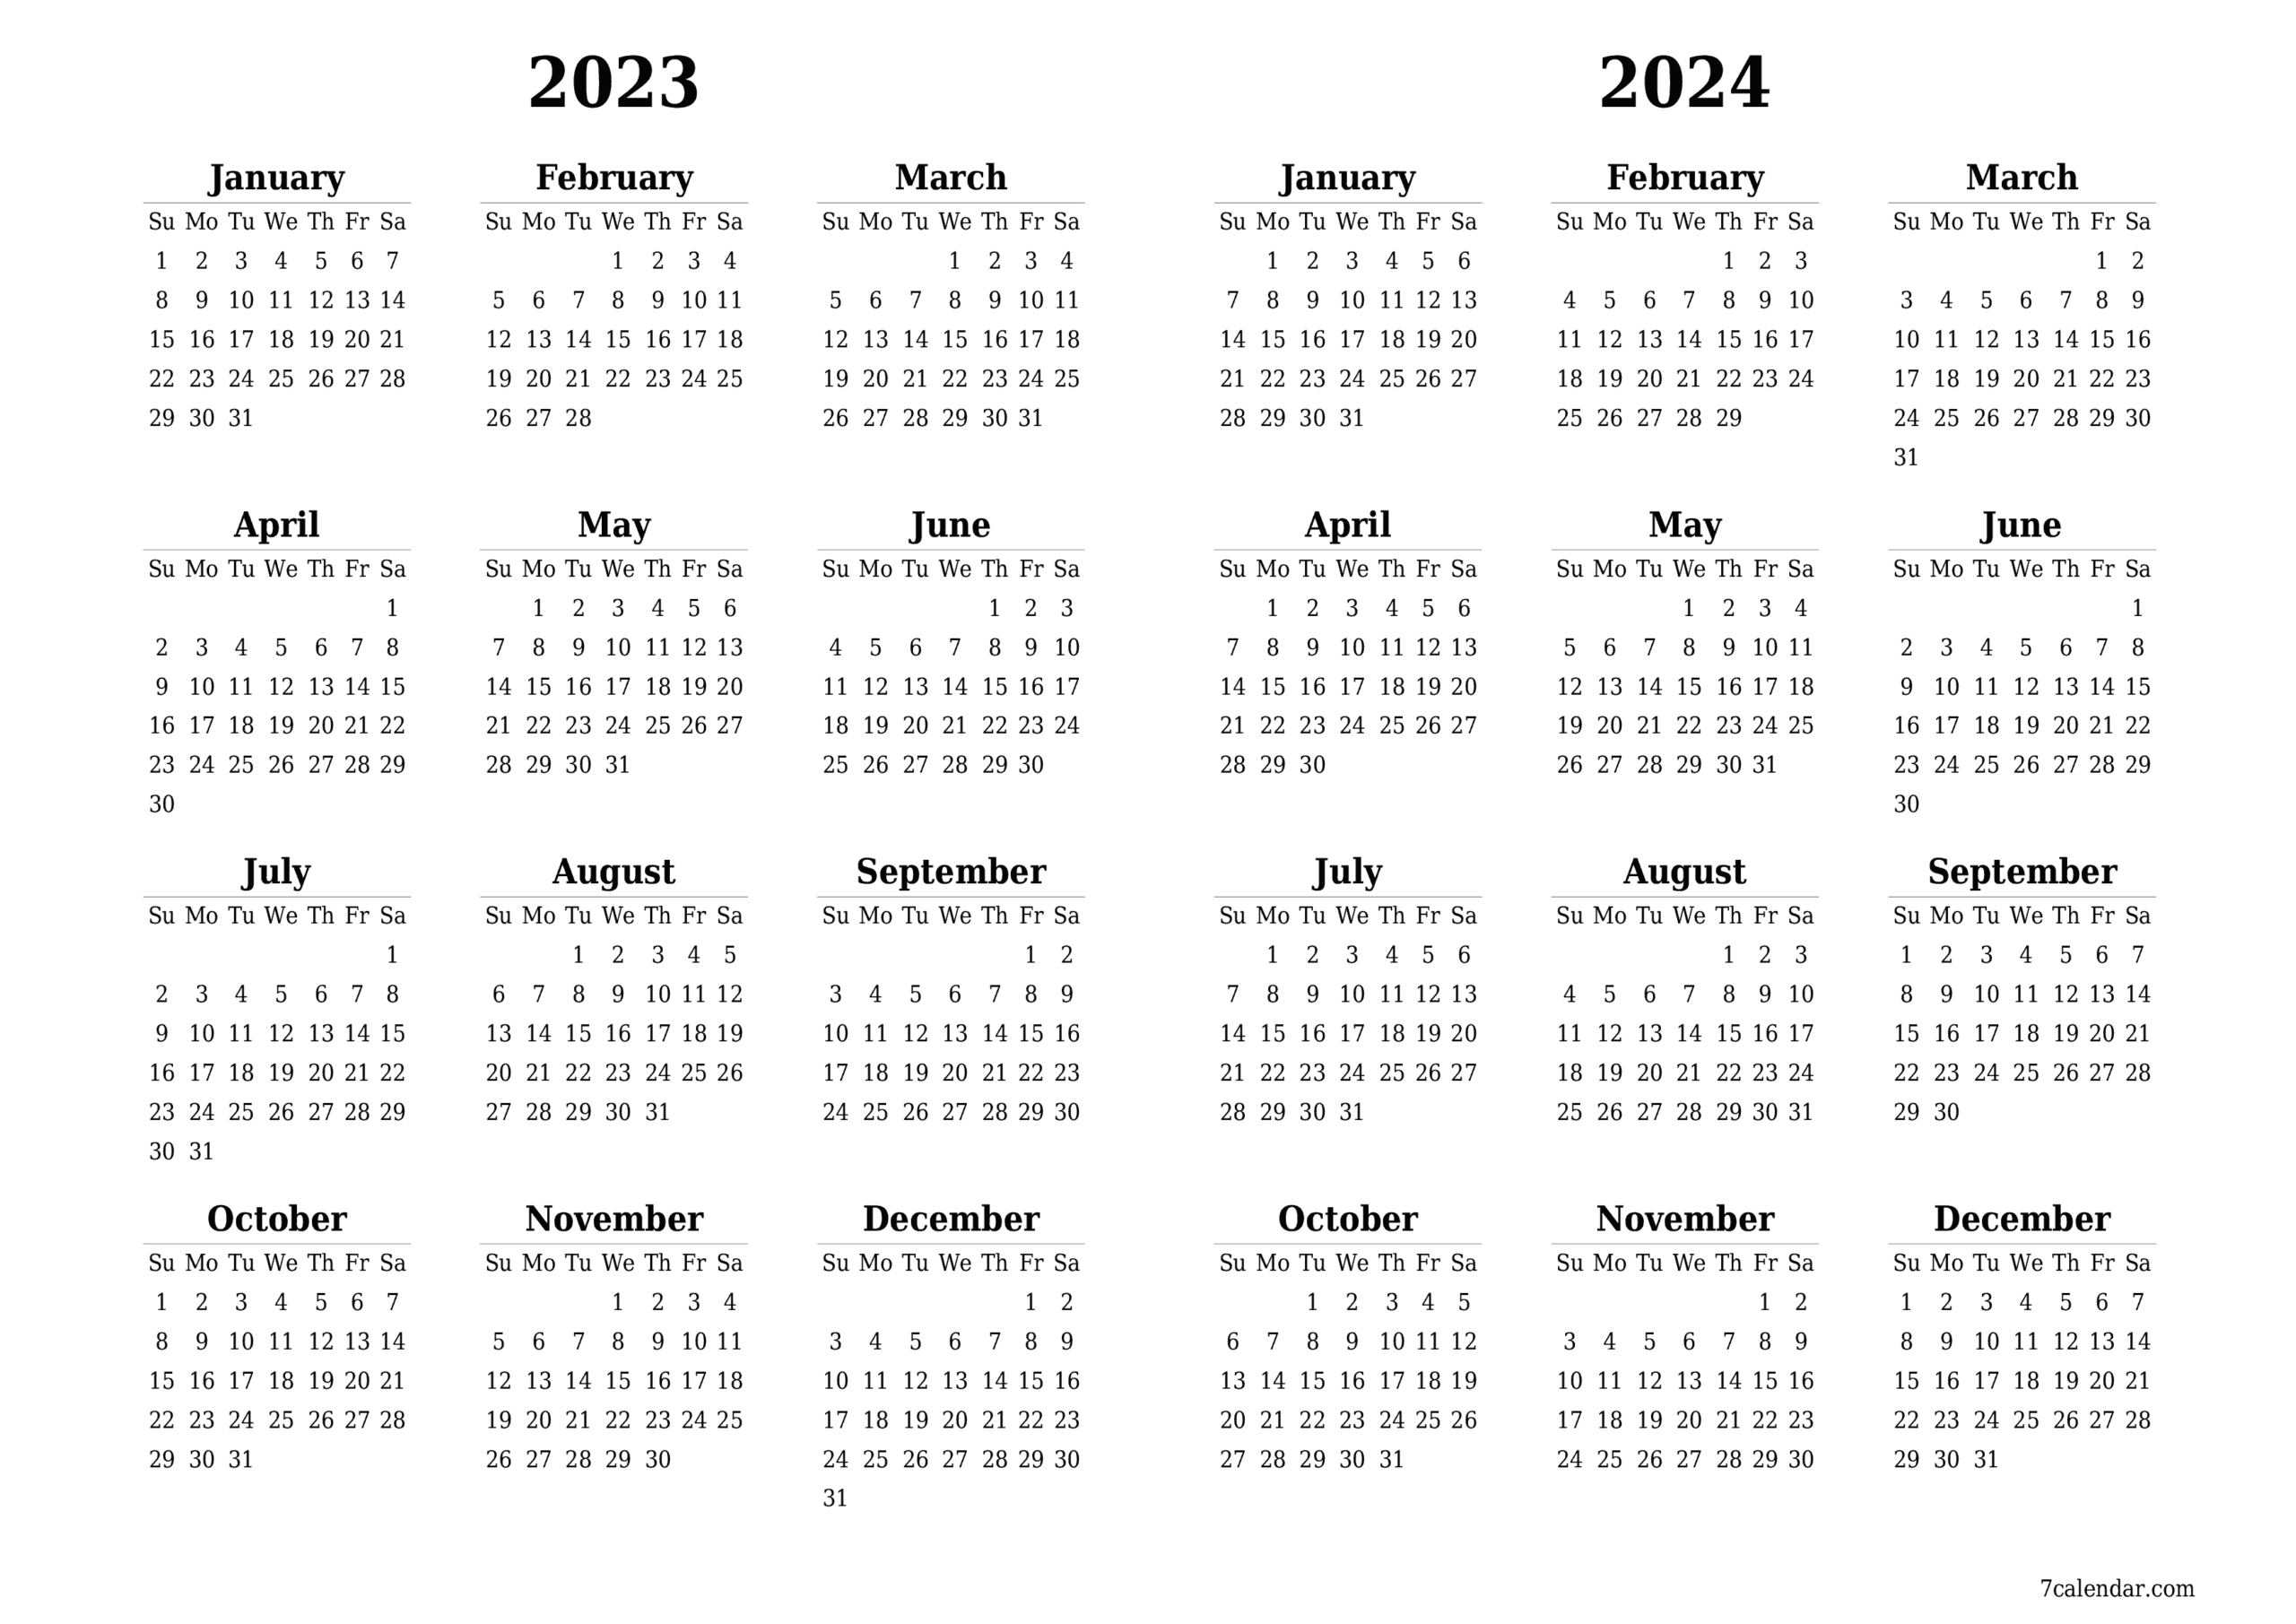 2023 Calendar And Planner For The Year, Pdf And Png Templates | Yearly Calendar 2023 And 2024